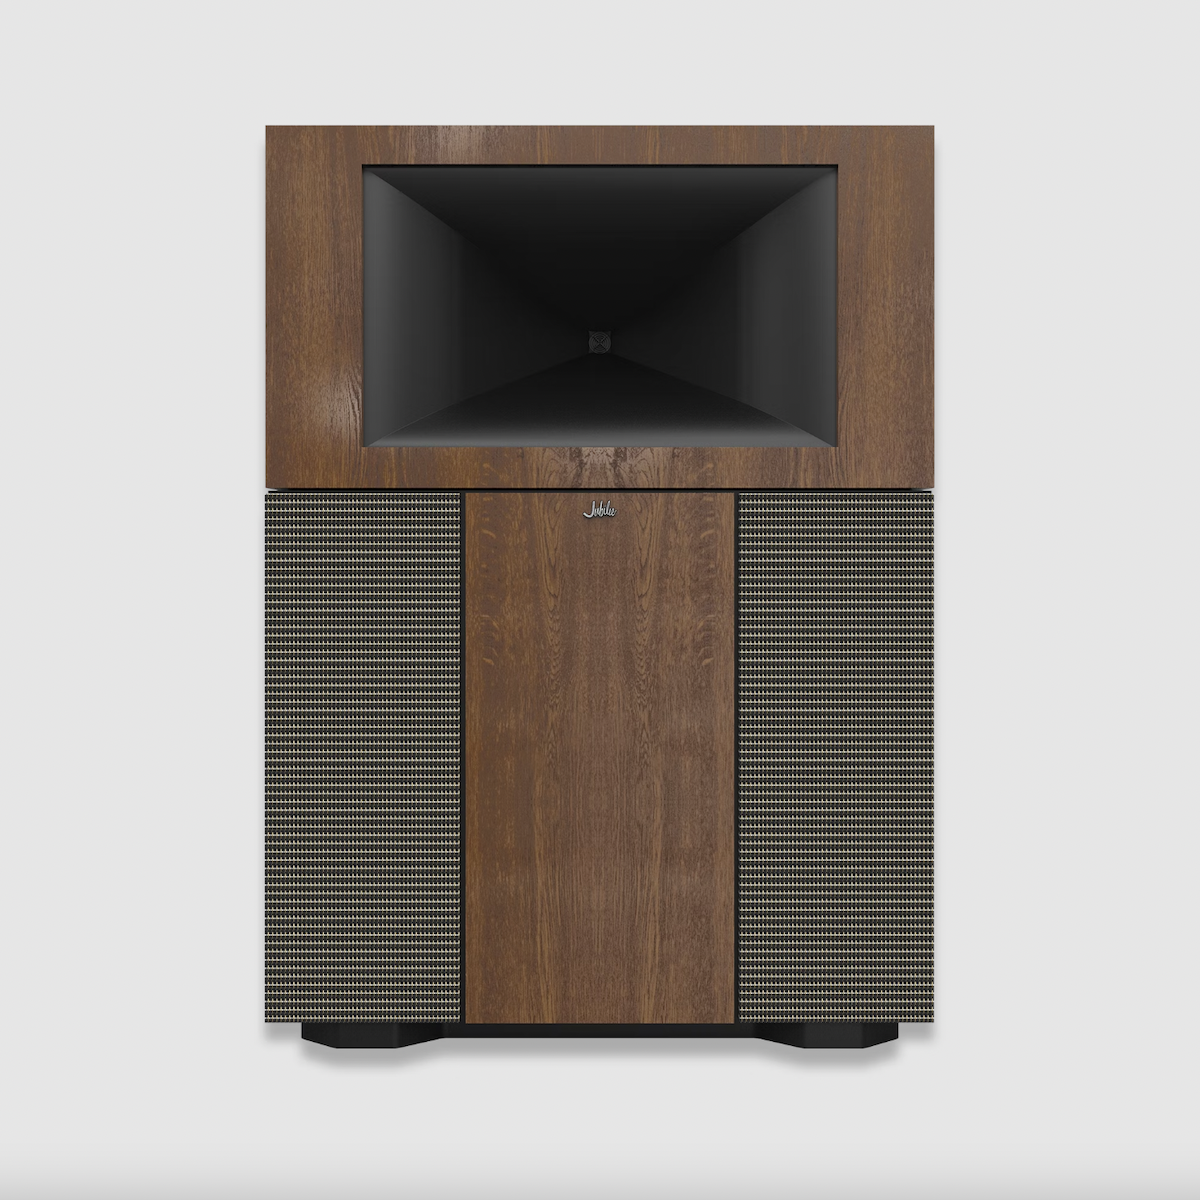 Klipsch Jubilee Speakers Are So Massive They&#8217;re Taller Than Most People